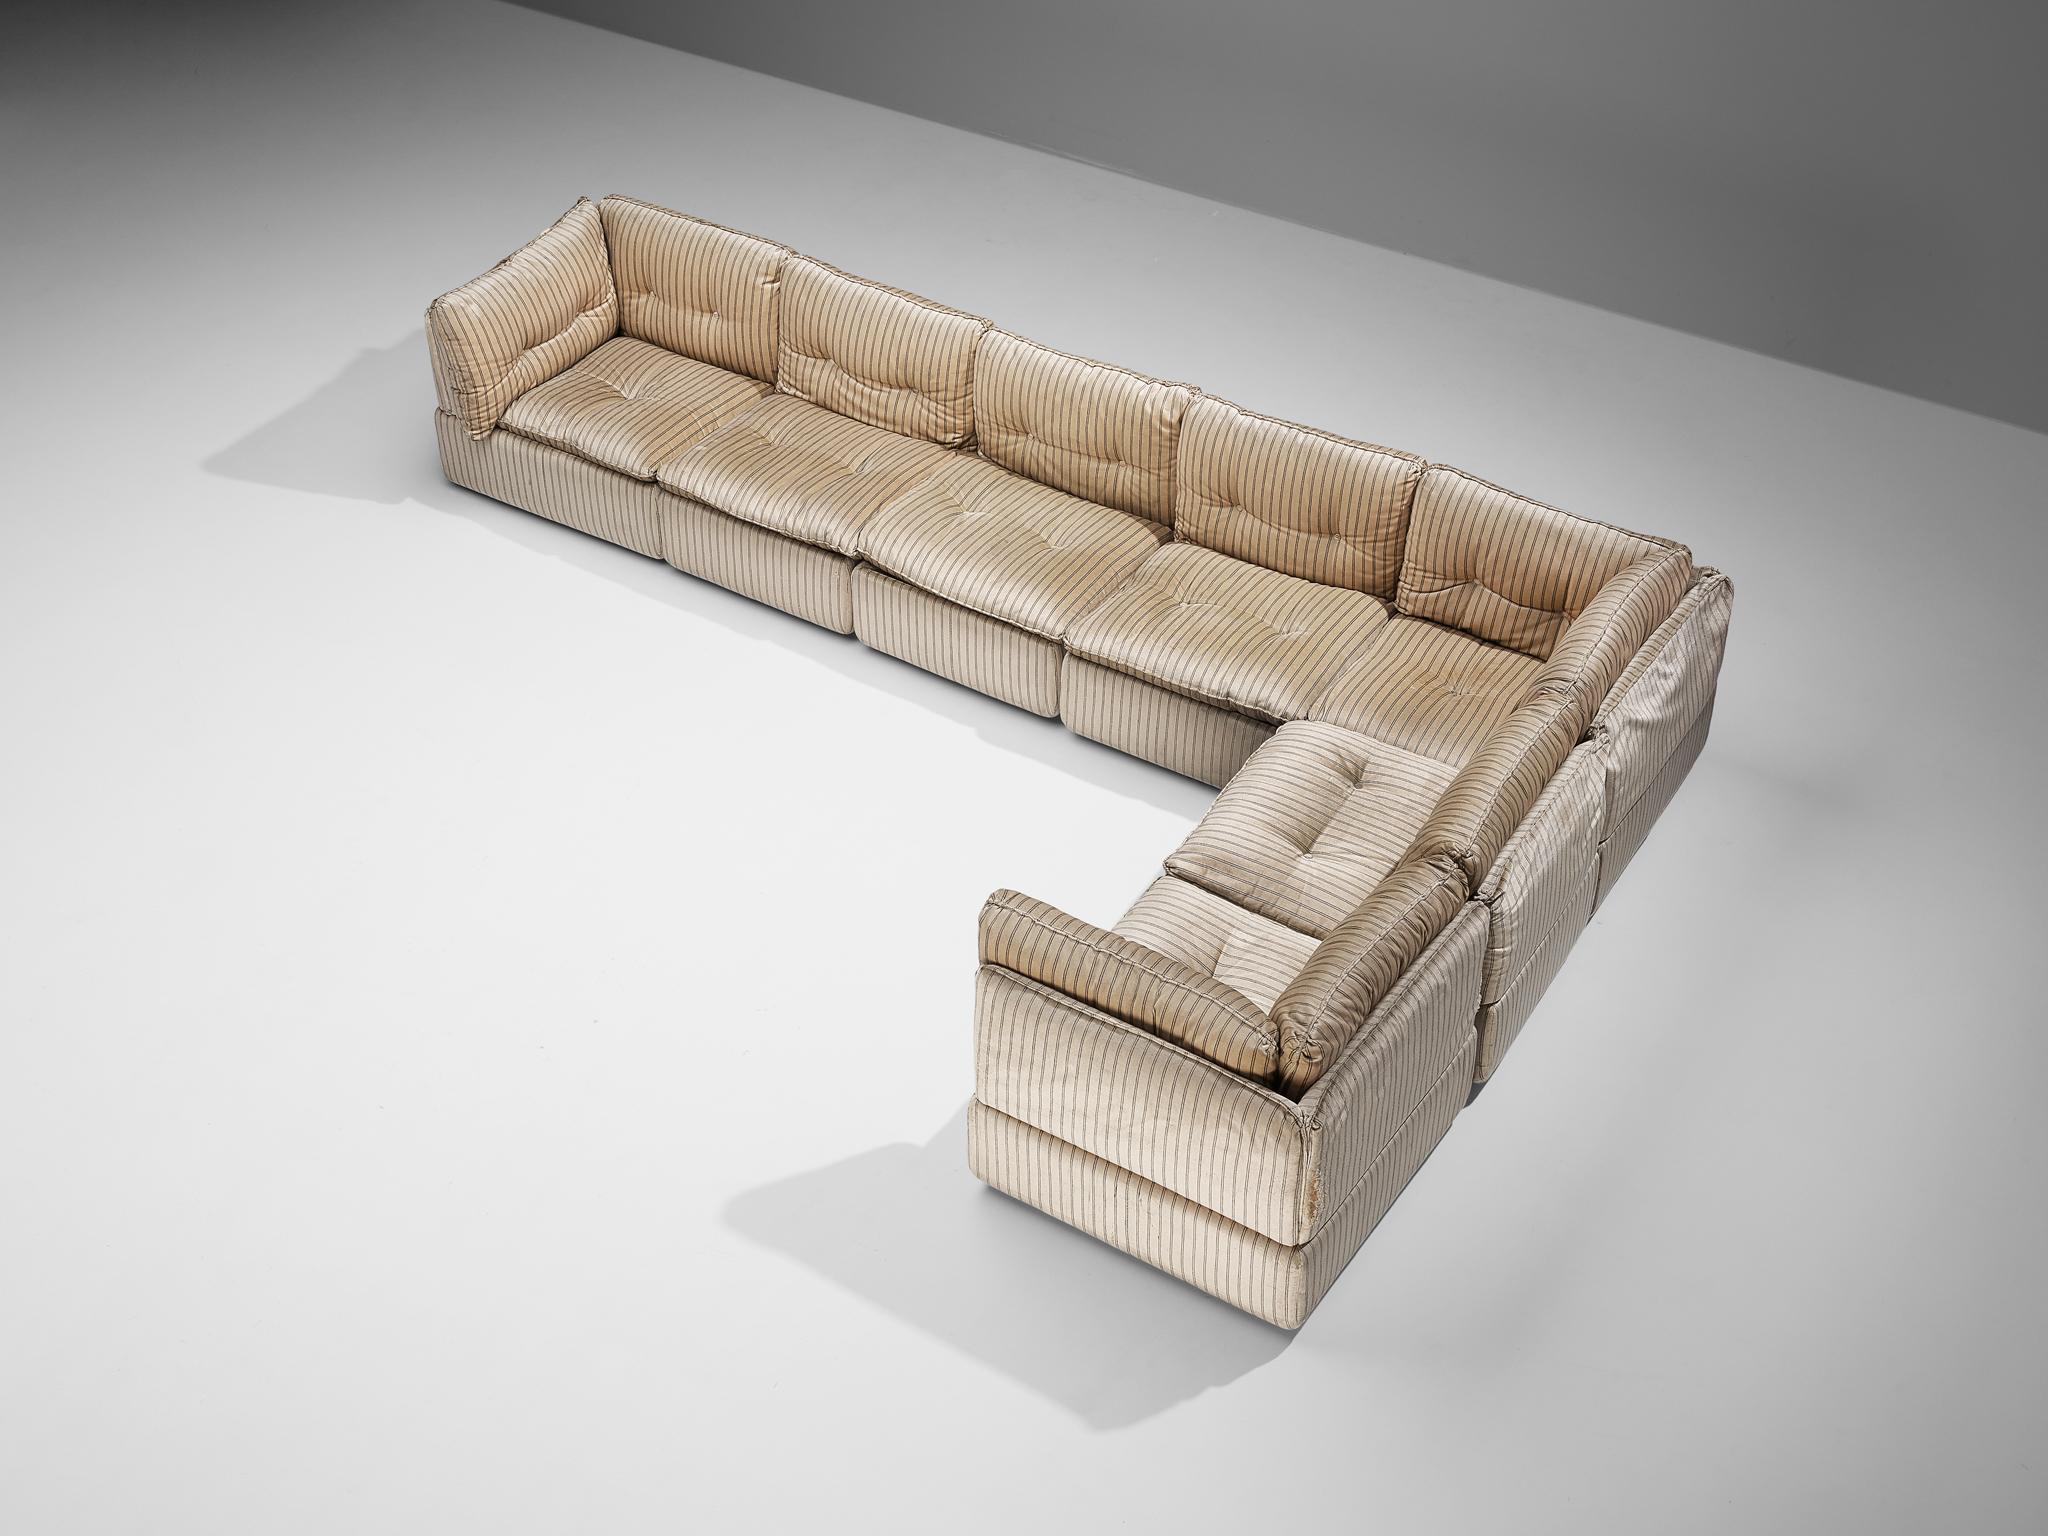 Modular sofa, velvet, Italy, 1970s

This grand sofa of Italian origin is characterized by a splendid construction, containing four regular elements and three corner elements. This means that it is possible to rearrange the sofa to your own wishes